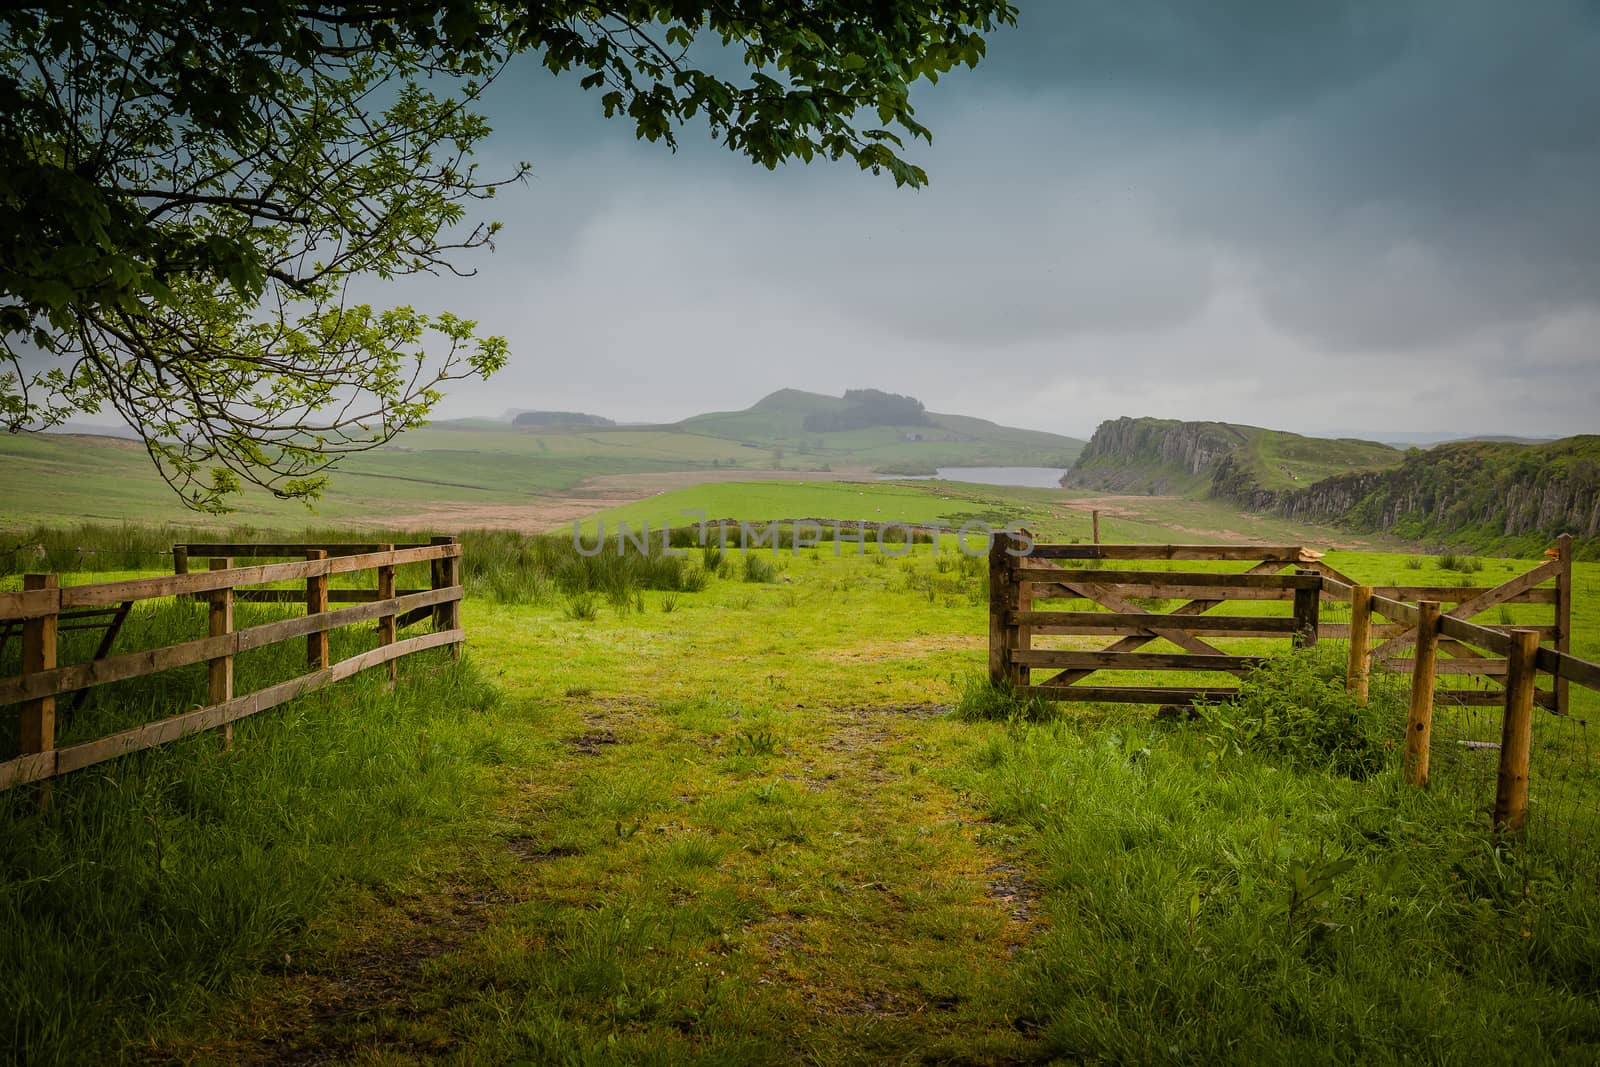 Green meadows and hills along Hadrian's Wall